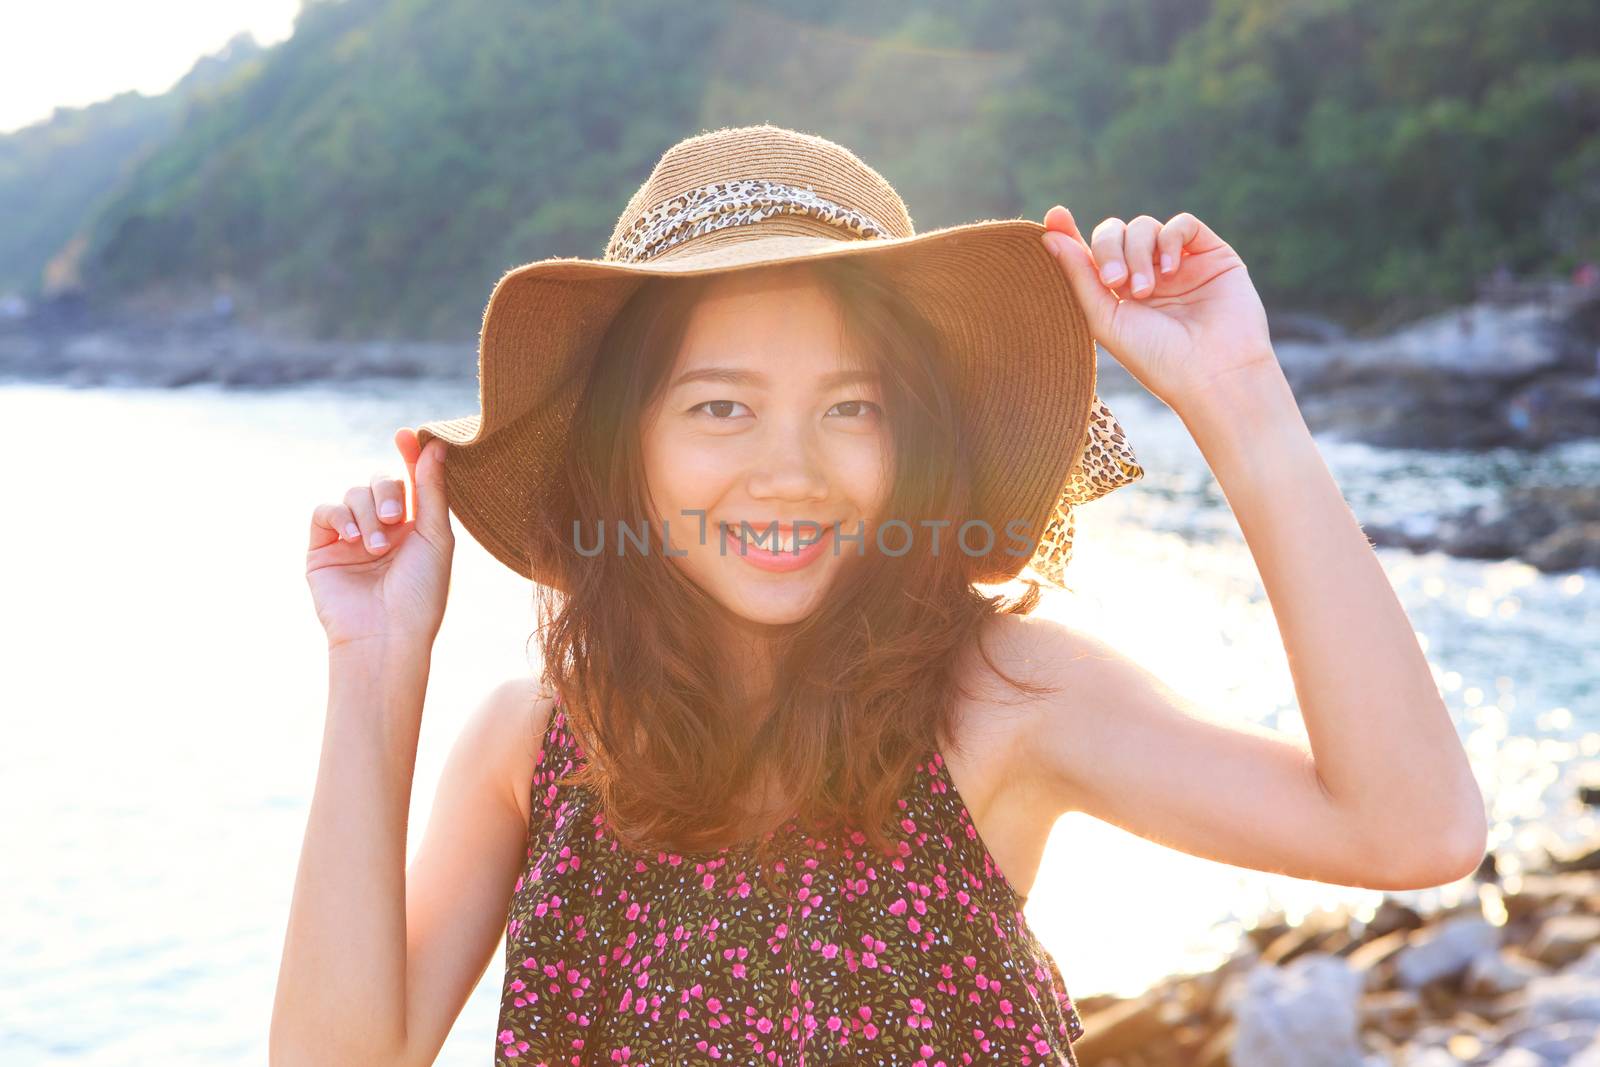 portrait face of beautiful woman wearing wide straw hat standing at sea side eyes looking to camera use for people on vacation and natural beauty of young and teen